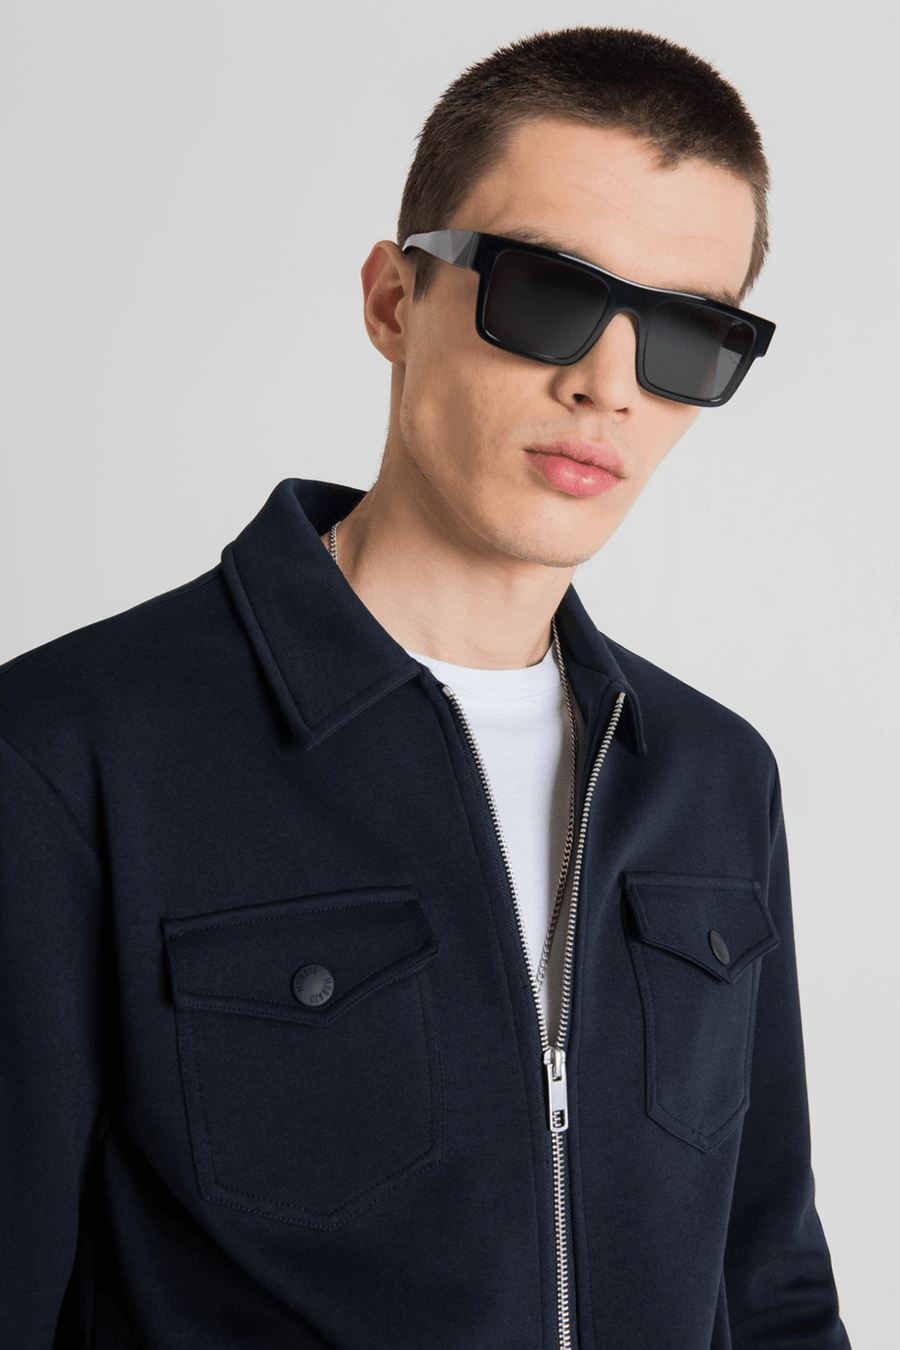 Buy the Antony Morato Zip Up Bomber Jacket in Blue at Intro. Spend £50 for free UK delivery. Official stockists. We ship worldwide.